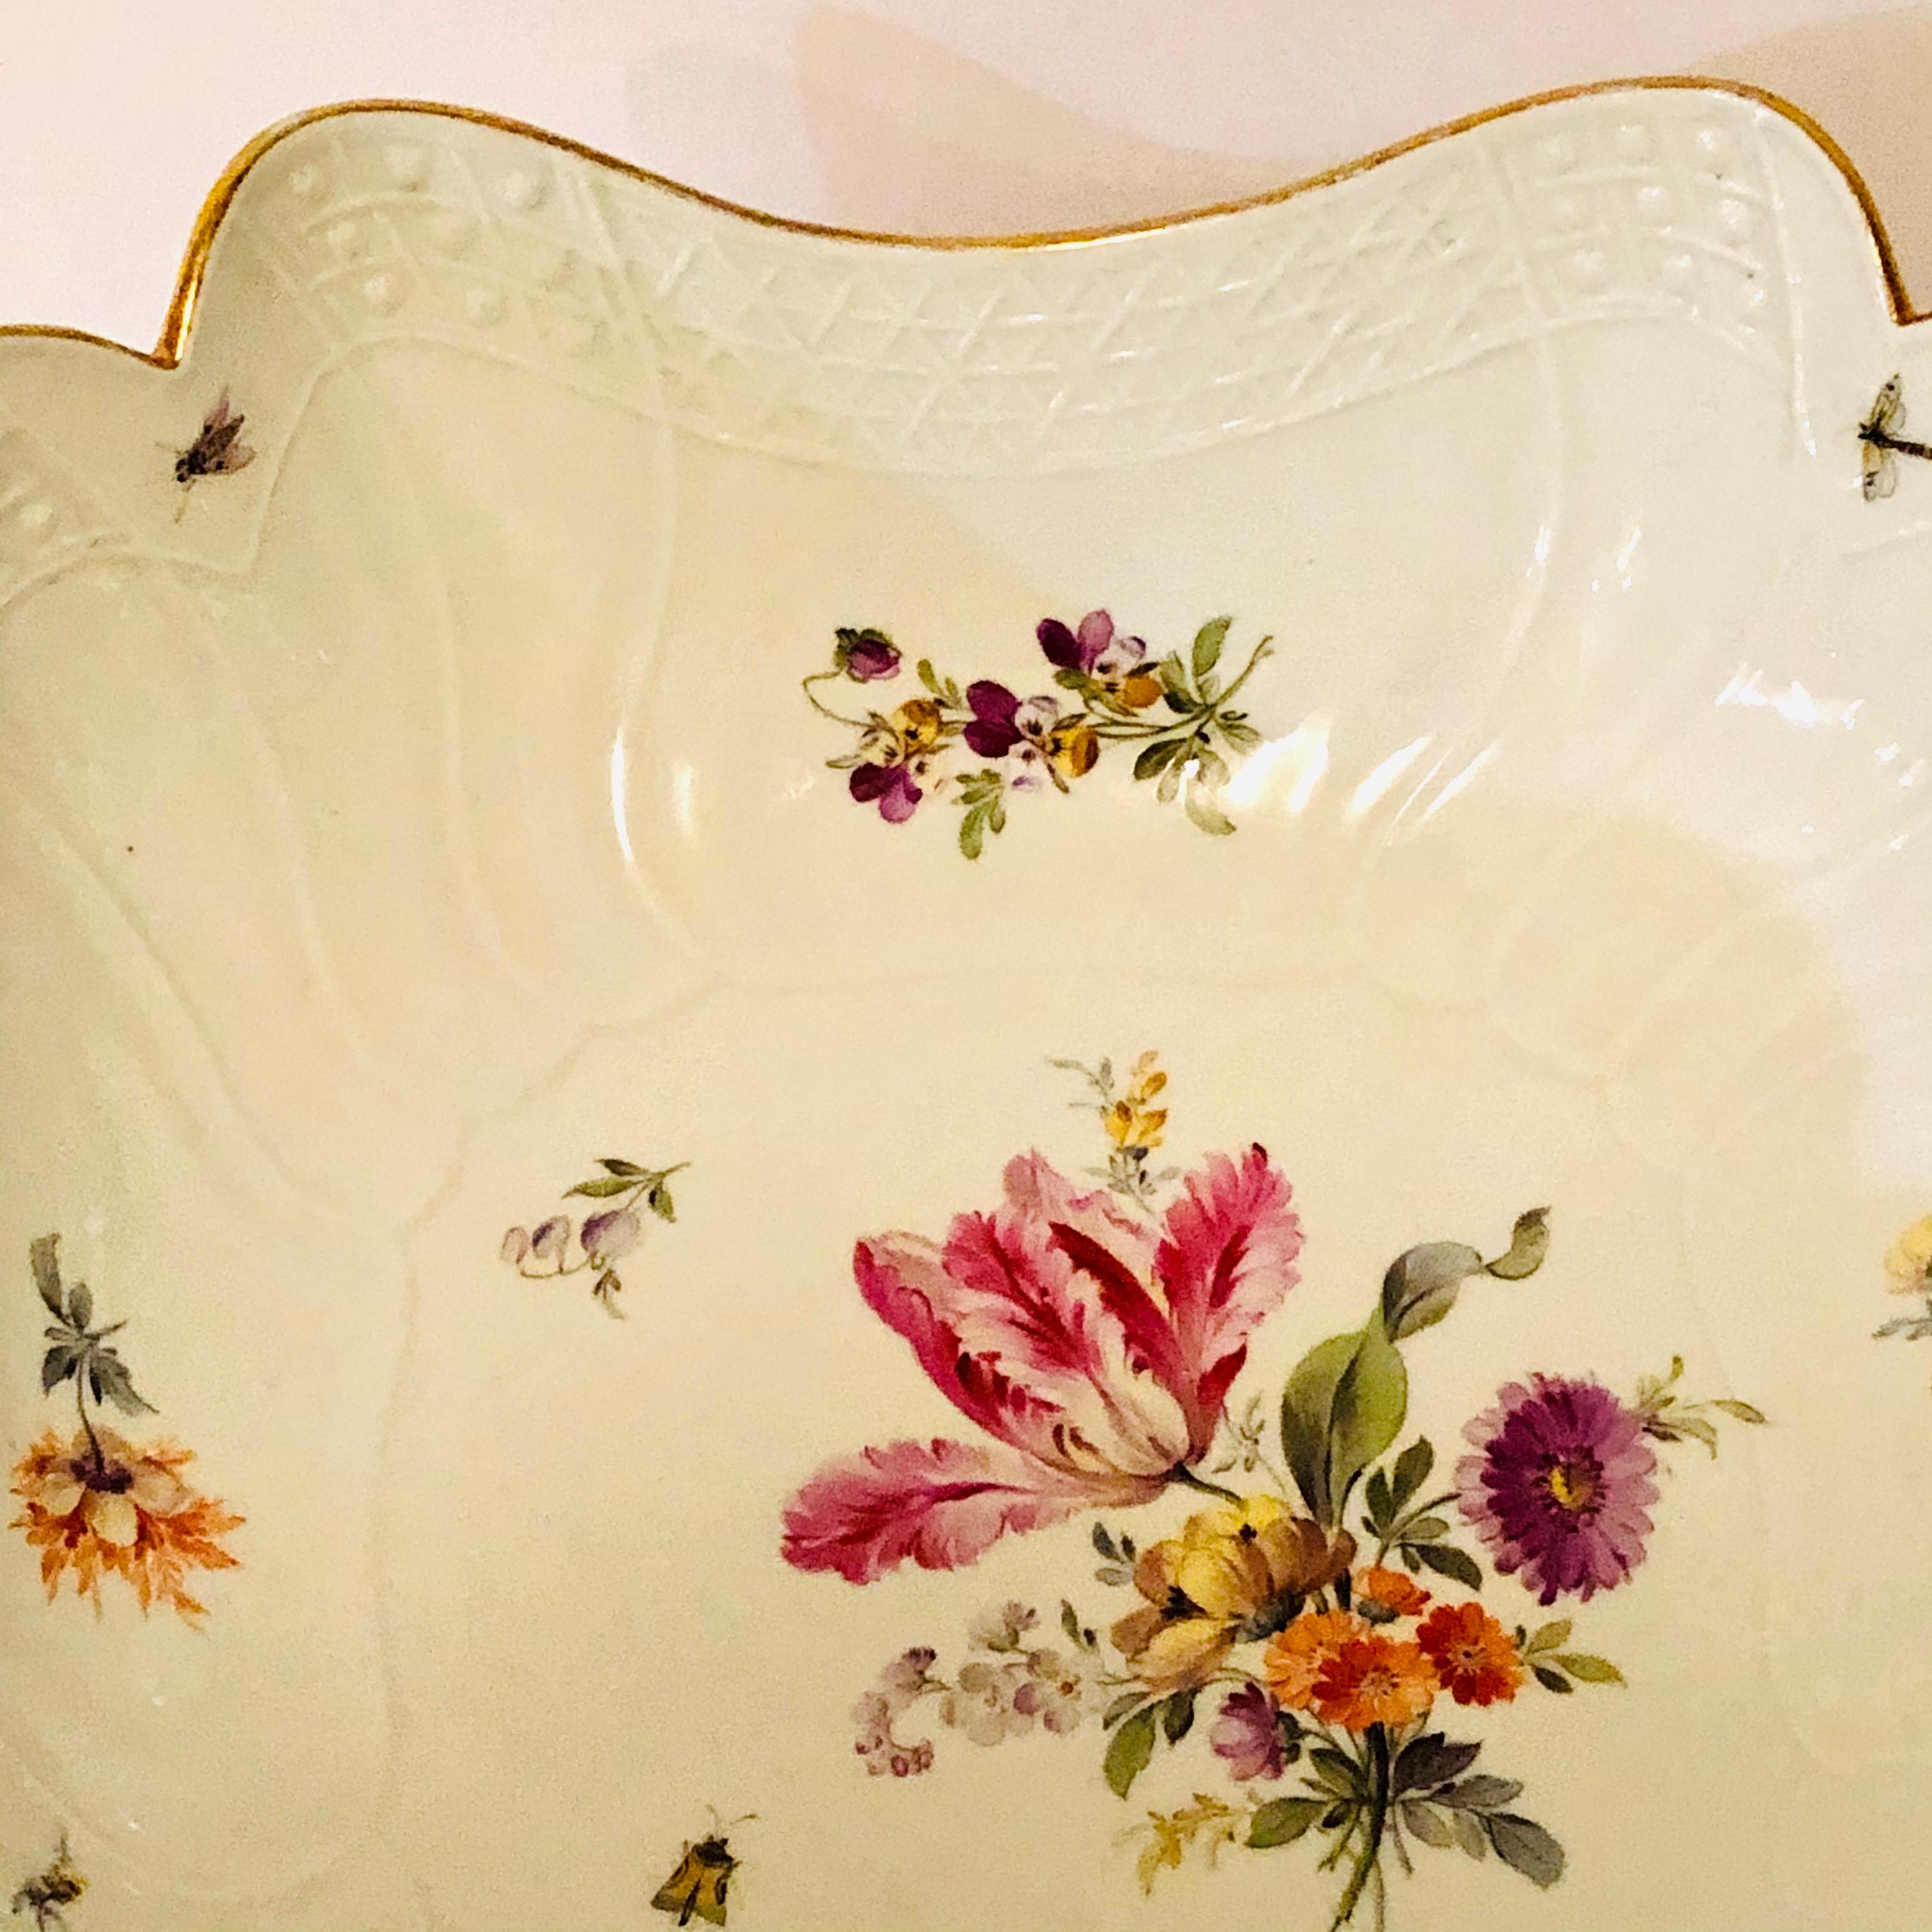 Late 19th Century Meissen Four Cornered Deep Serving Bowl from the 1880s with Five Flower Bouquets